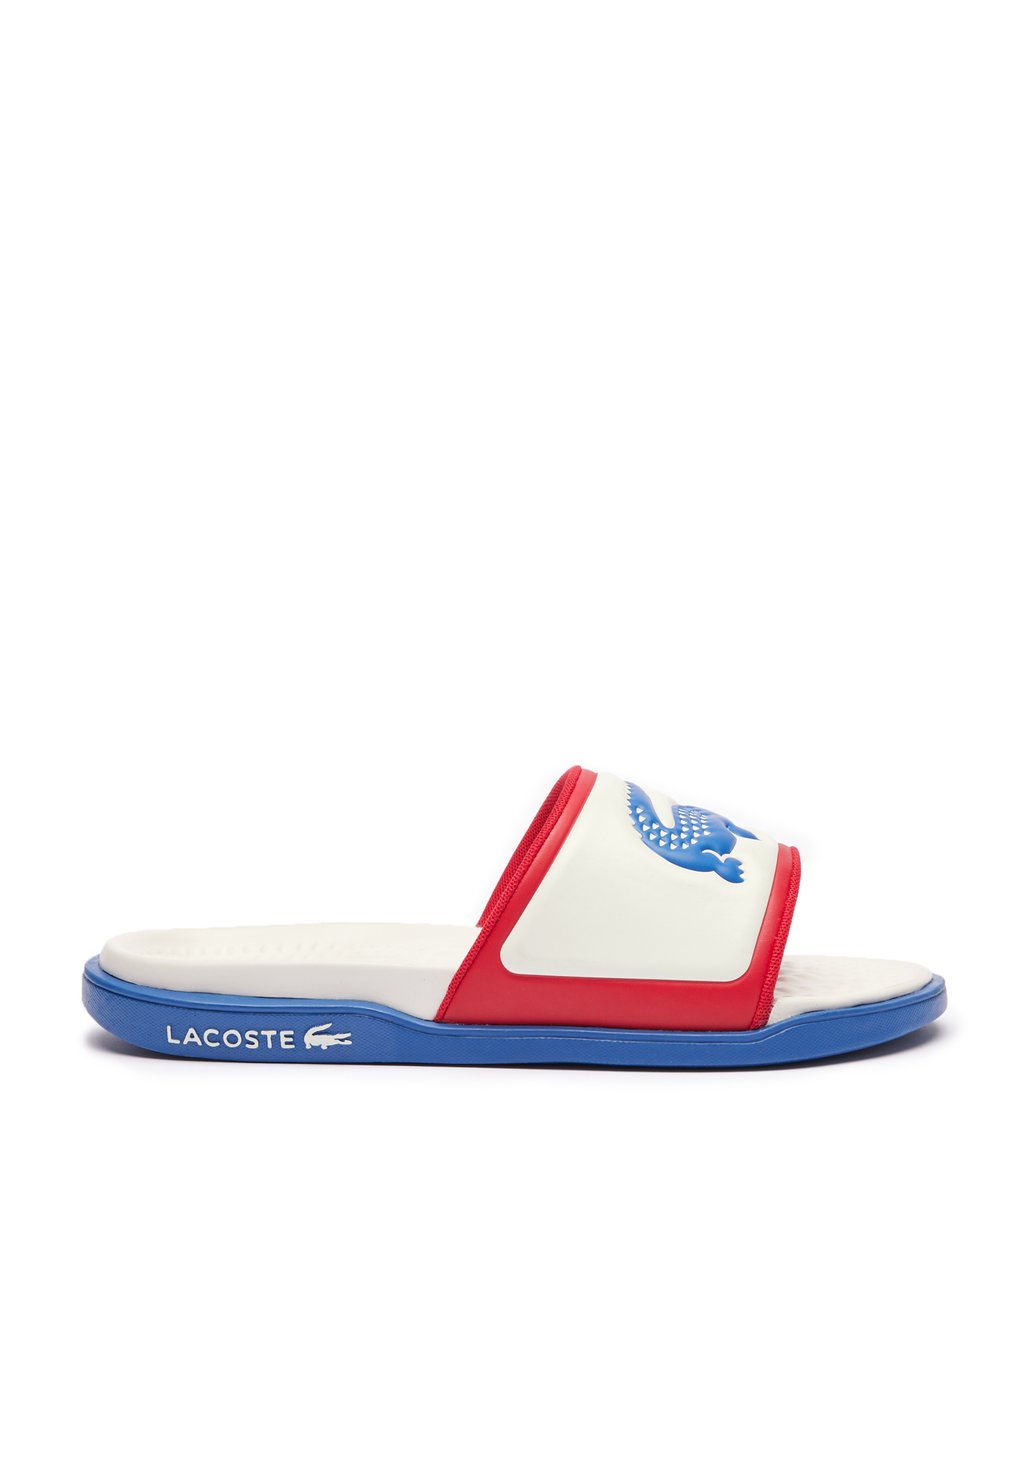 Шлепанцы Lacoste, цвет off wht blu red w1b кроссовки lacoste sport athleisure off wht red